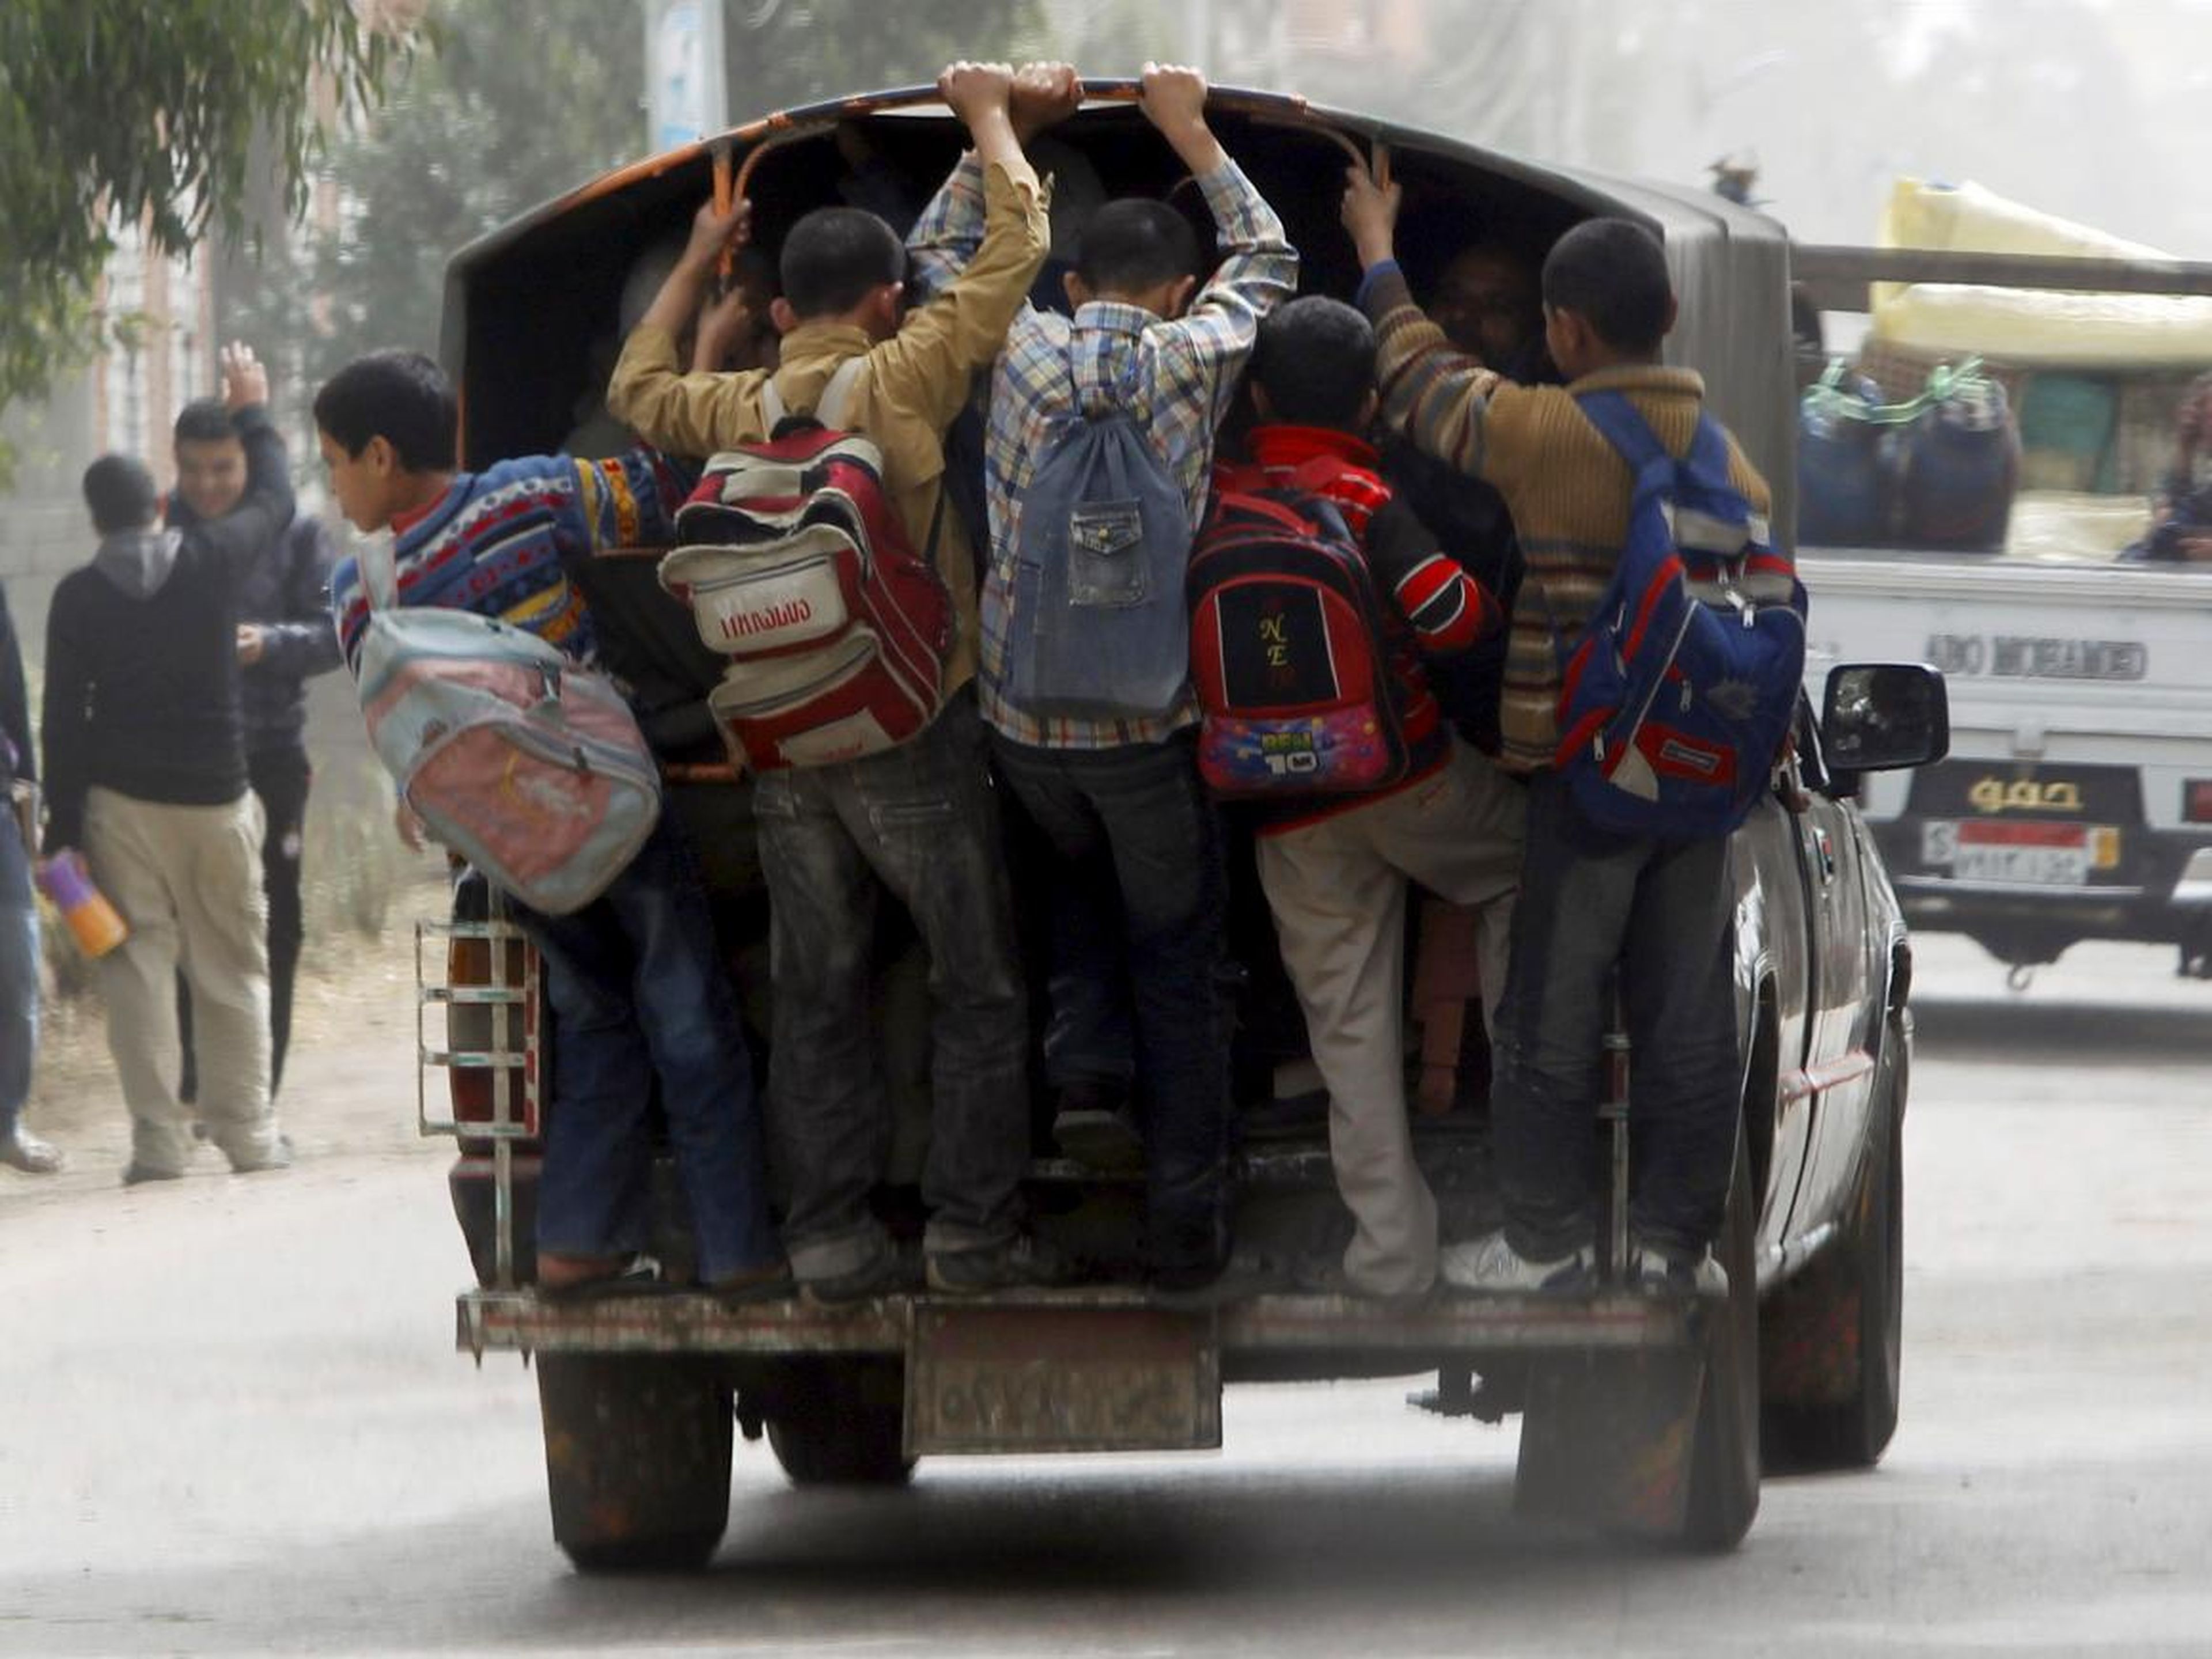 In parts of Cairo, Egypt, "school buses" involve kids piling into and hanging off the back of ordinary trucks.